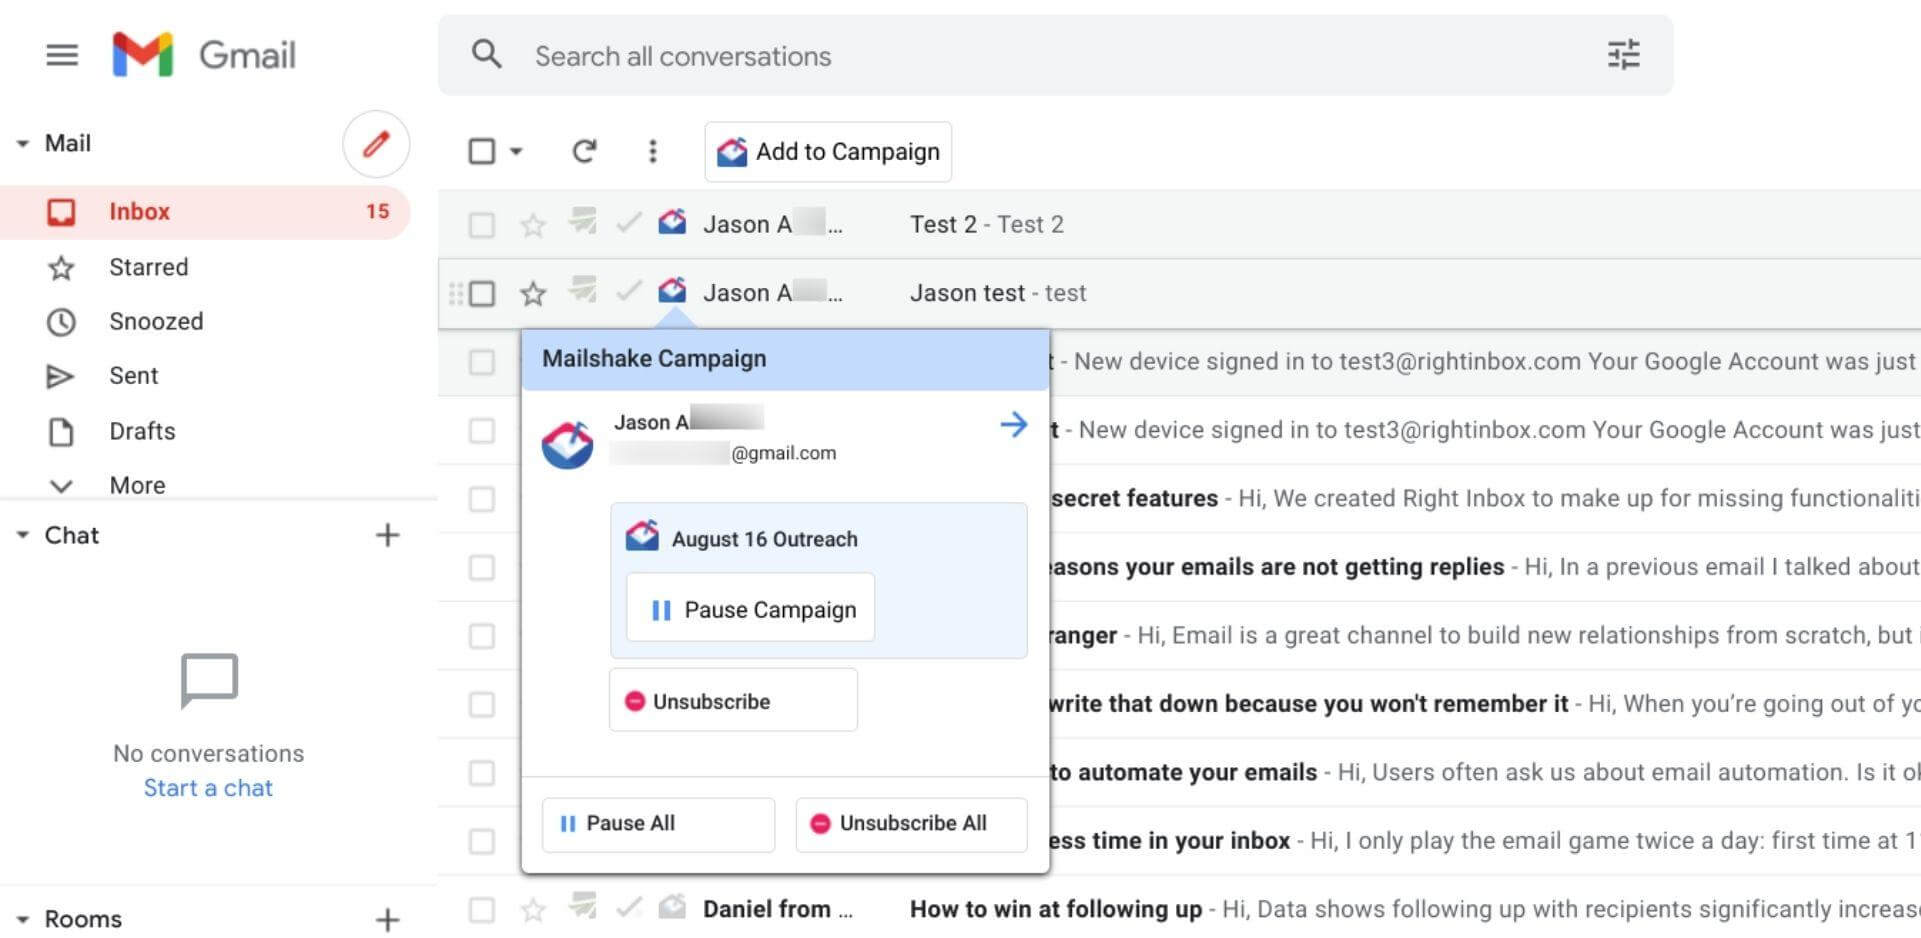 Manage Mailshake Campaigns in Gmail